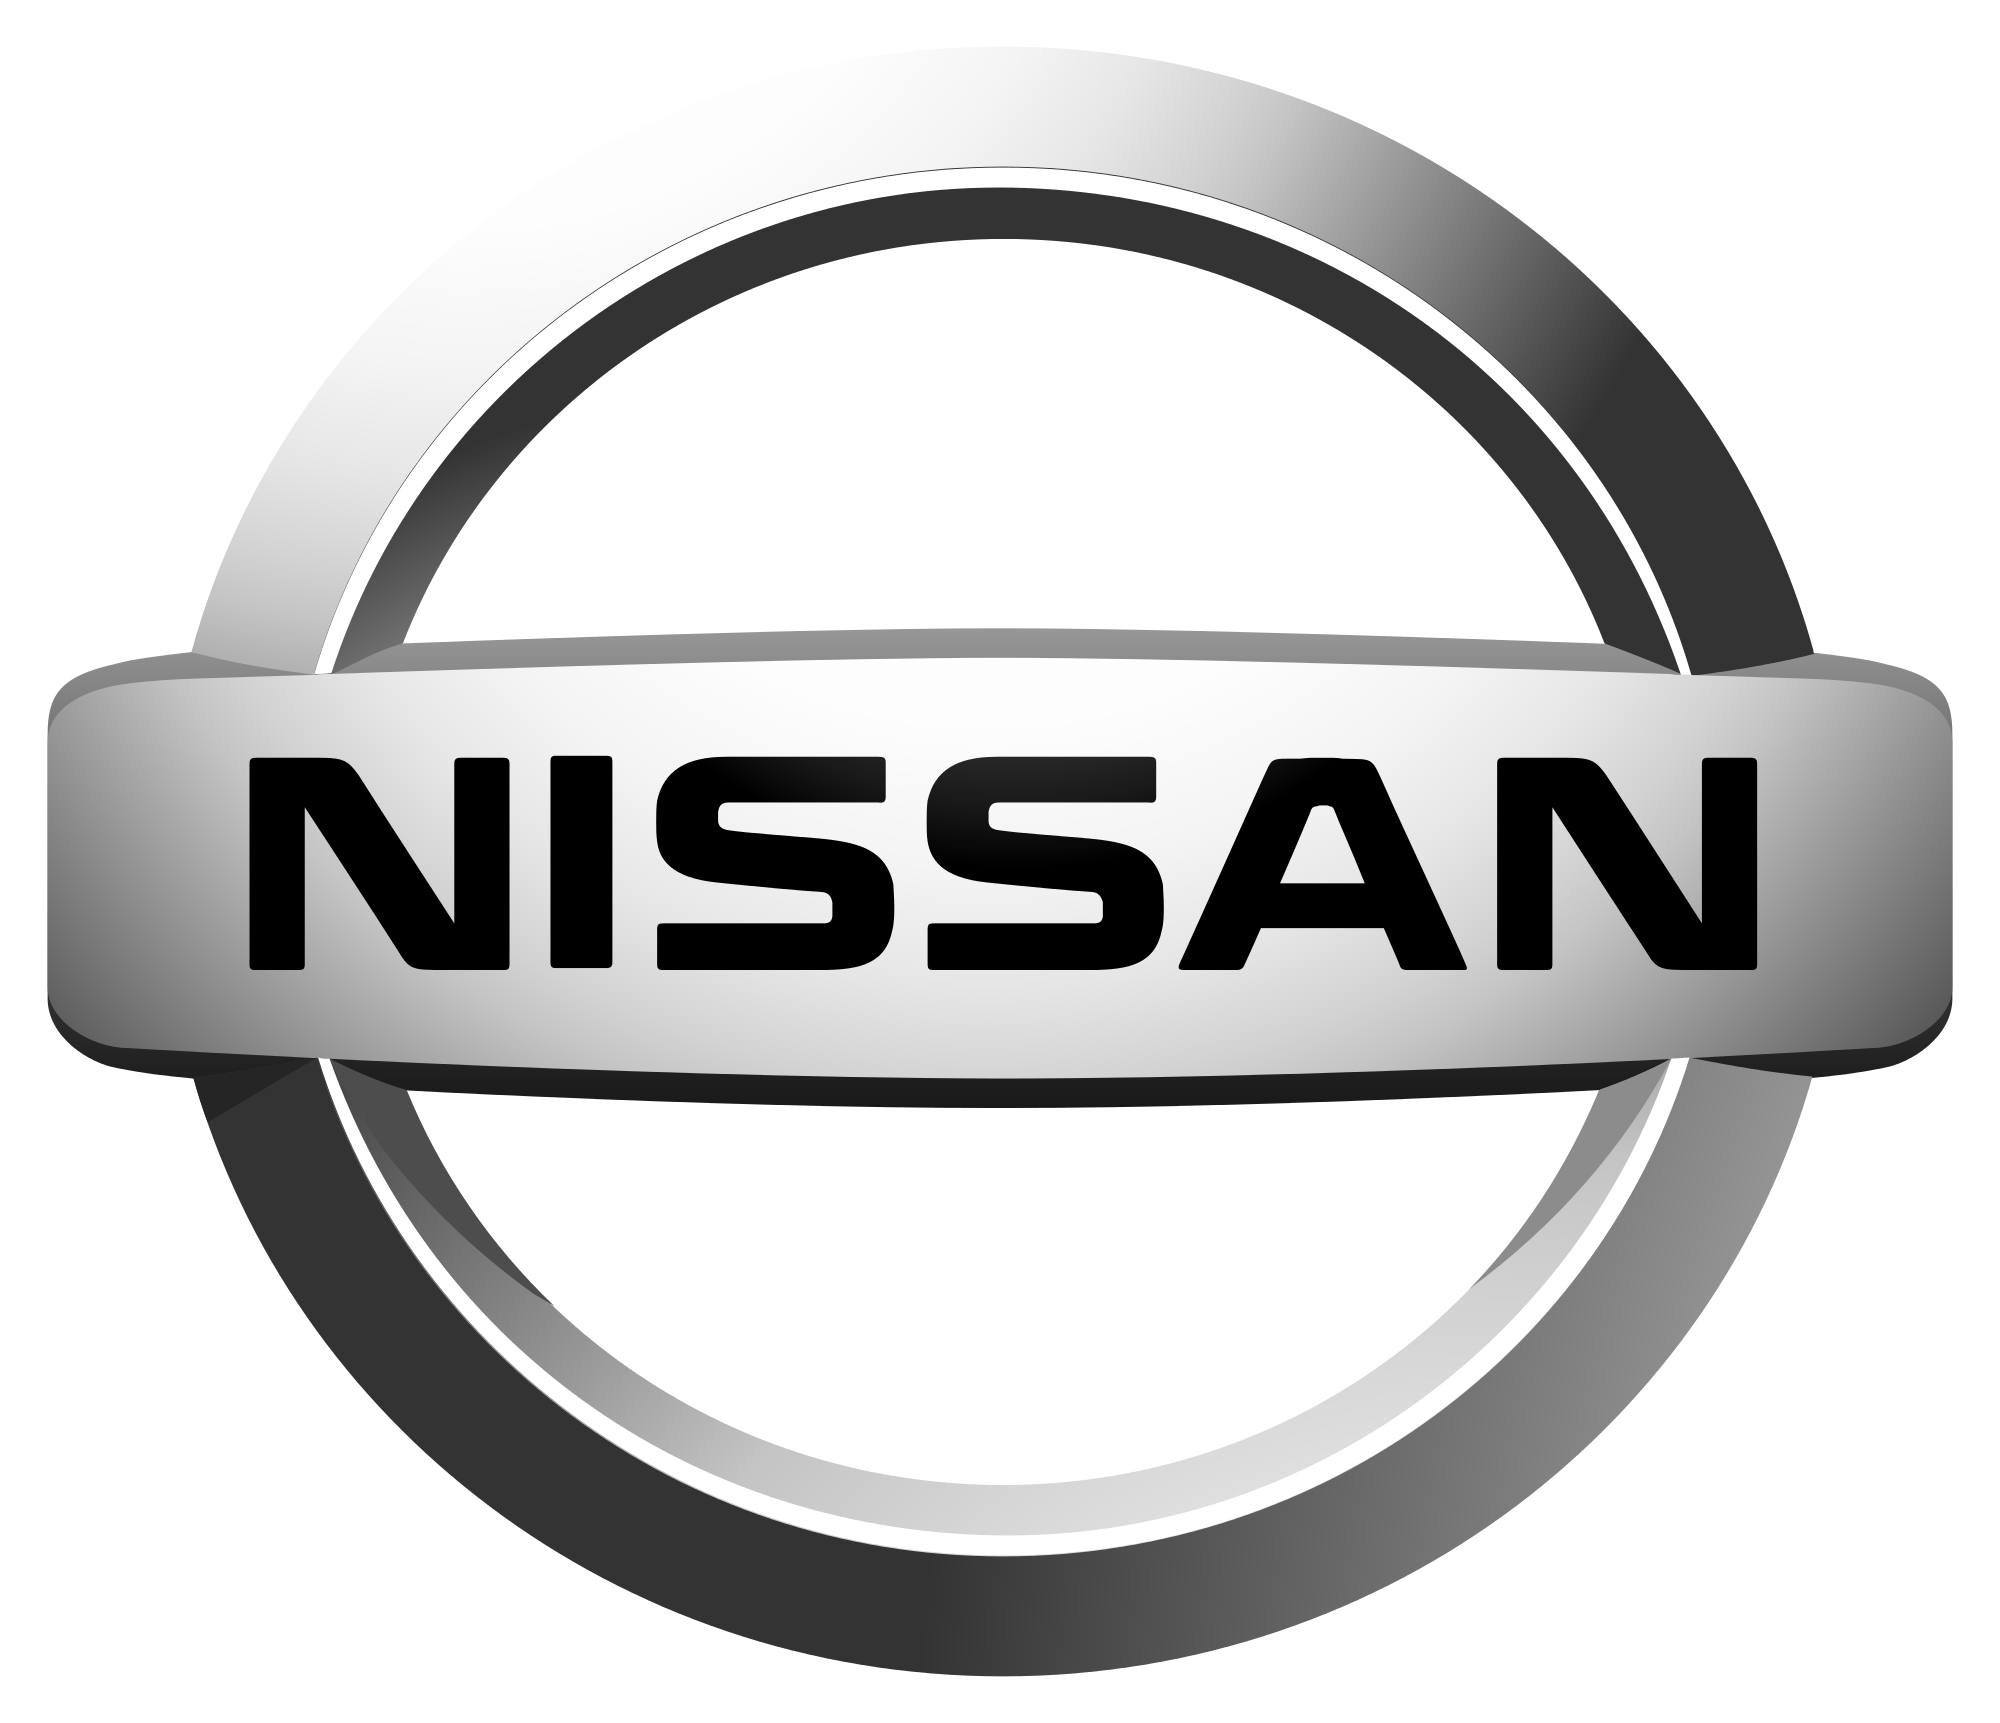 Top 10 Most Valuable Car Brands 2021 Nissan